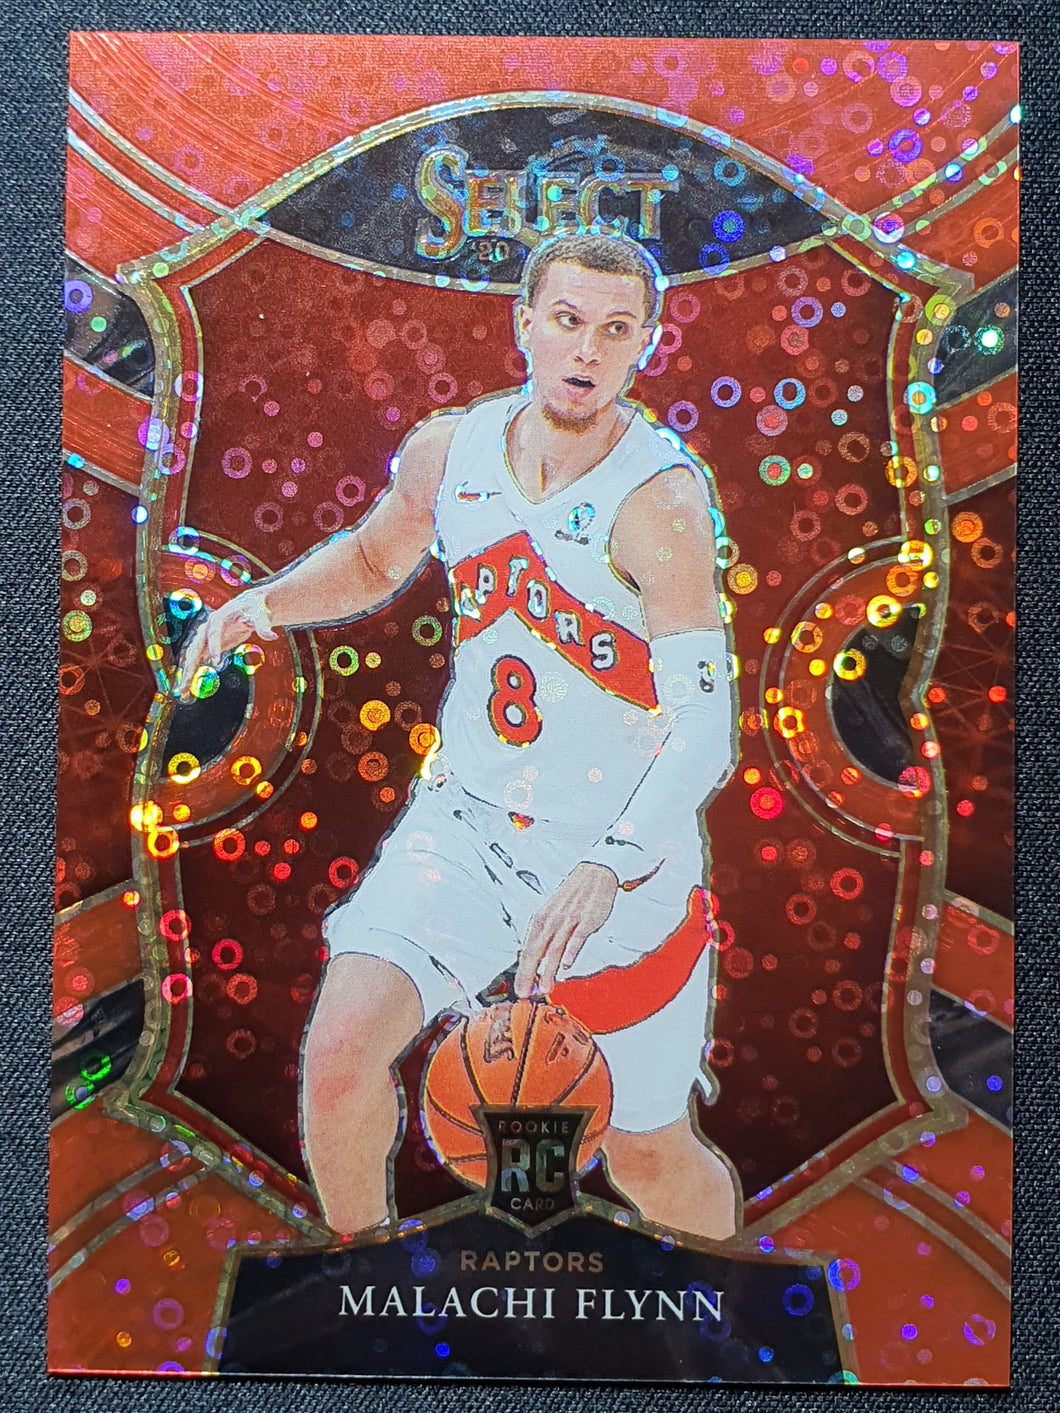 2020-21 Panini Select Malachi Flynn Concourse Red Disco /49 Prizm Rookie RC